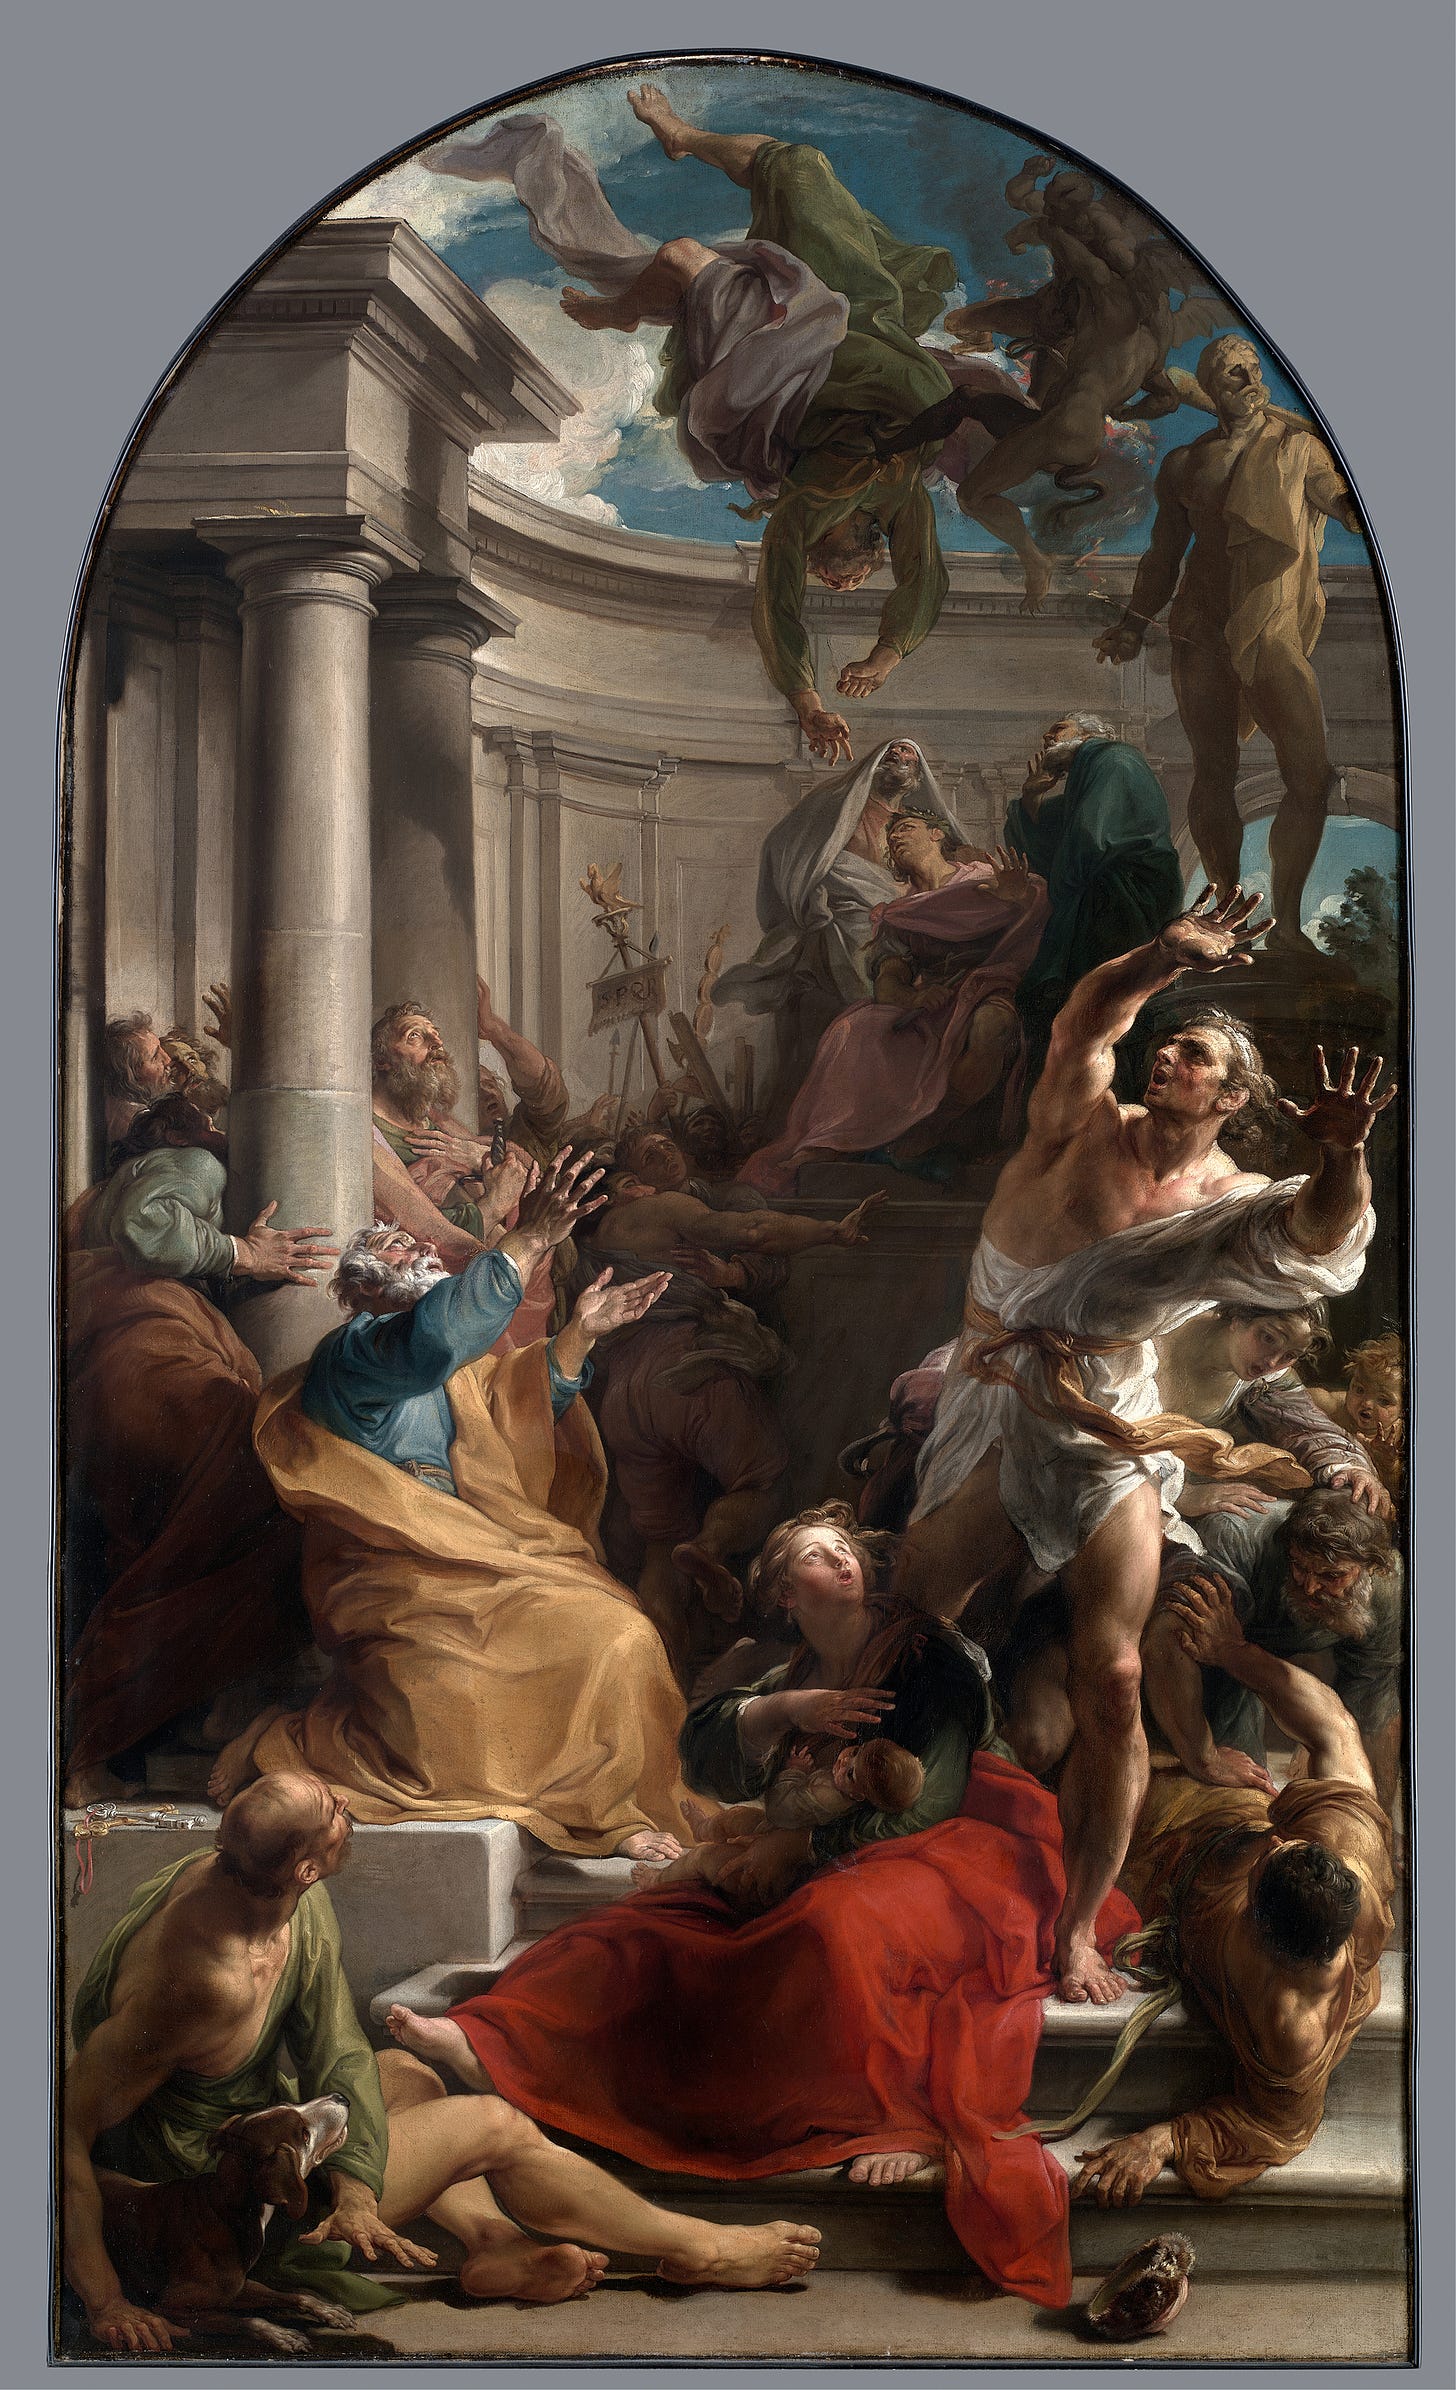 This artwork is a classic by Pompeo Batoni.The Fall of Simon Magus (c. 1745- 1750) by Pompeo Batoni